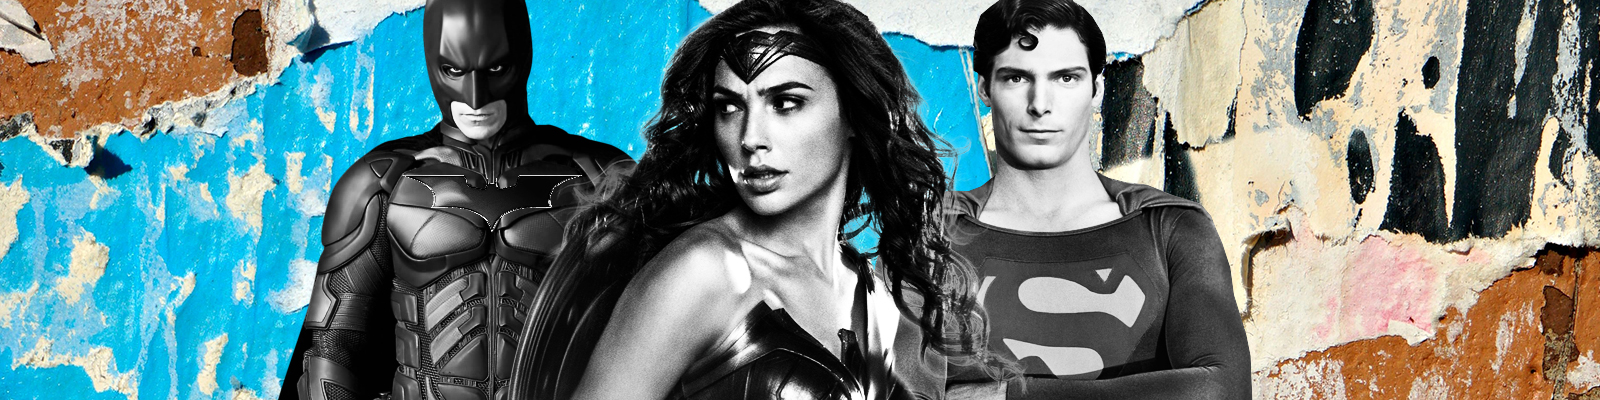 The Best DC Comics Movies: Every Film, Ranked